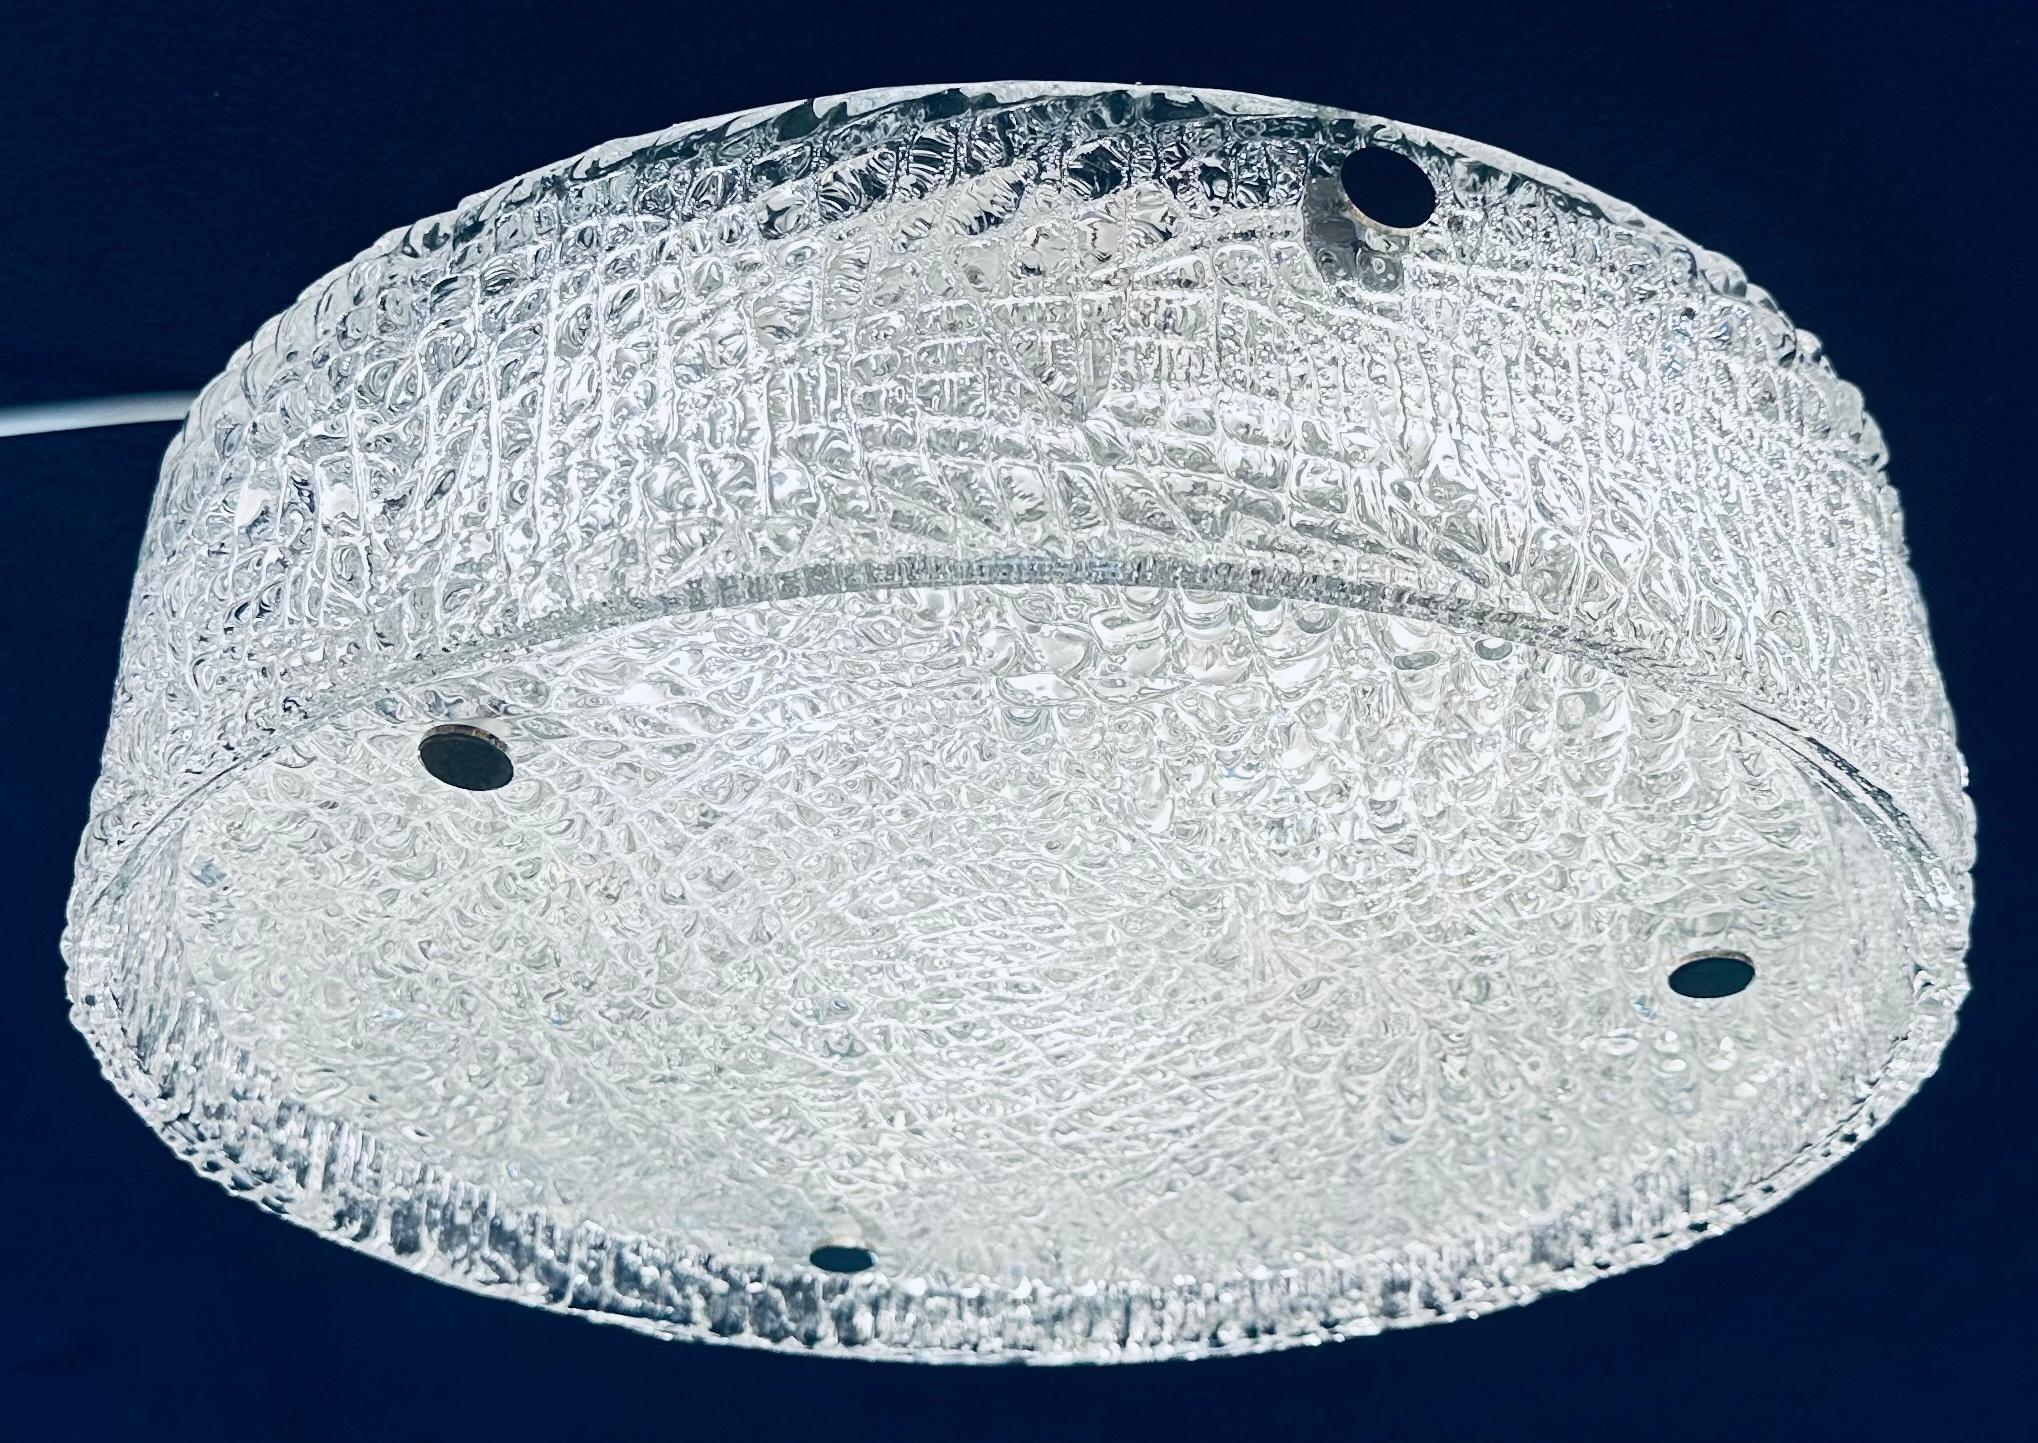 1960s German Kaiser Leuchten textured, iced-glass, flush mount ceiling light. The thick textured glass circular base plate is mounted onto the white frame with three chrome screws which secure it in place. The light-bulbs can be accessed by removing